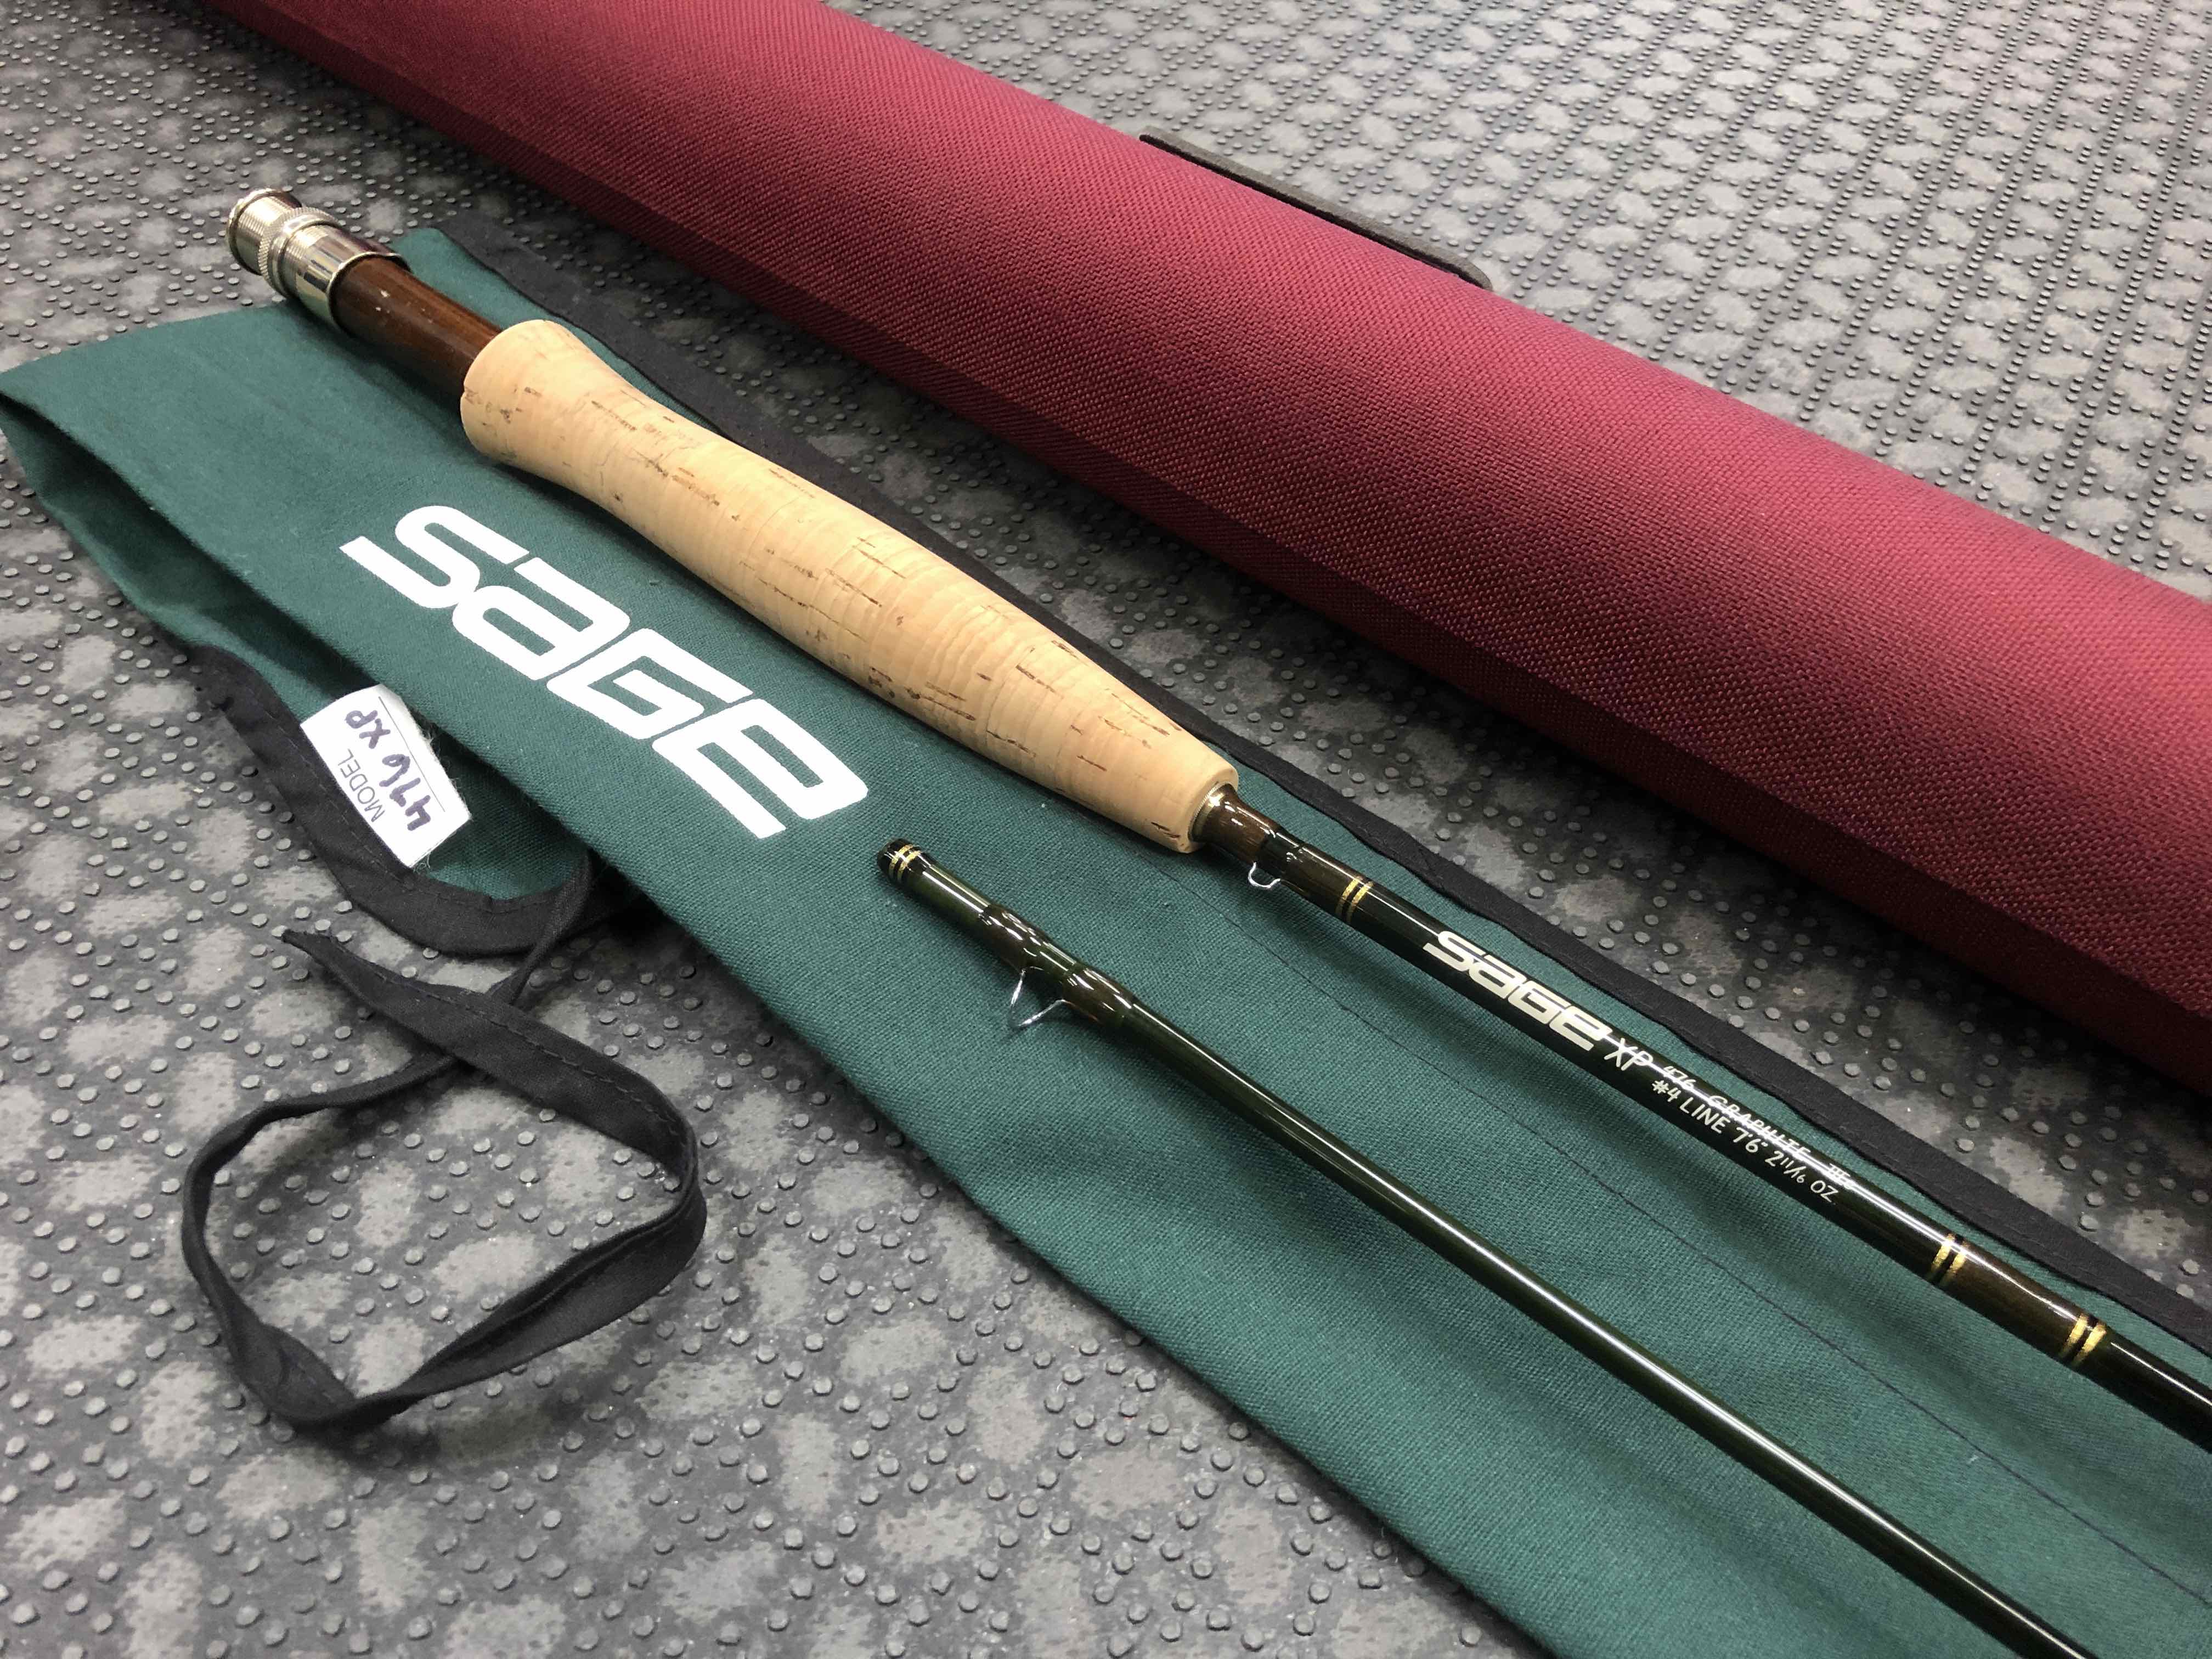 SAGE Graphite Fishing Rods & Poles for sale